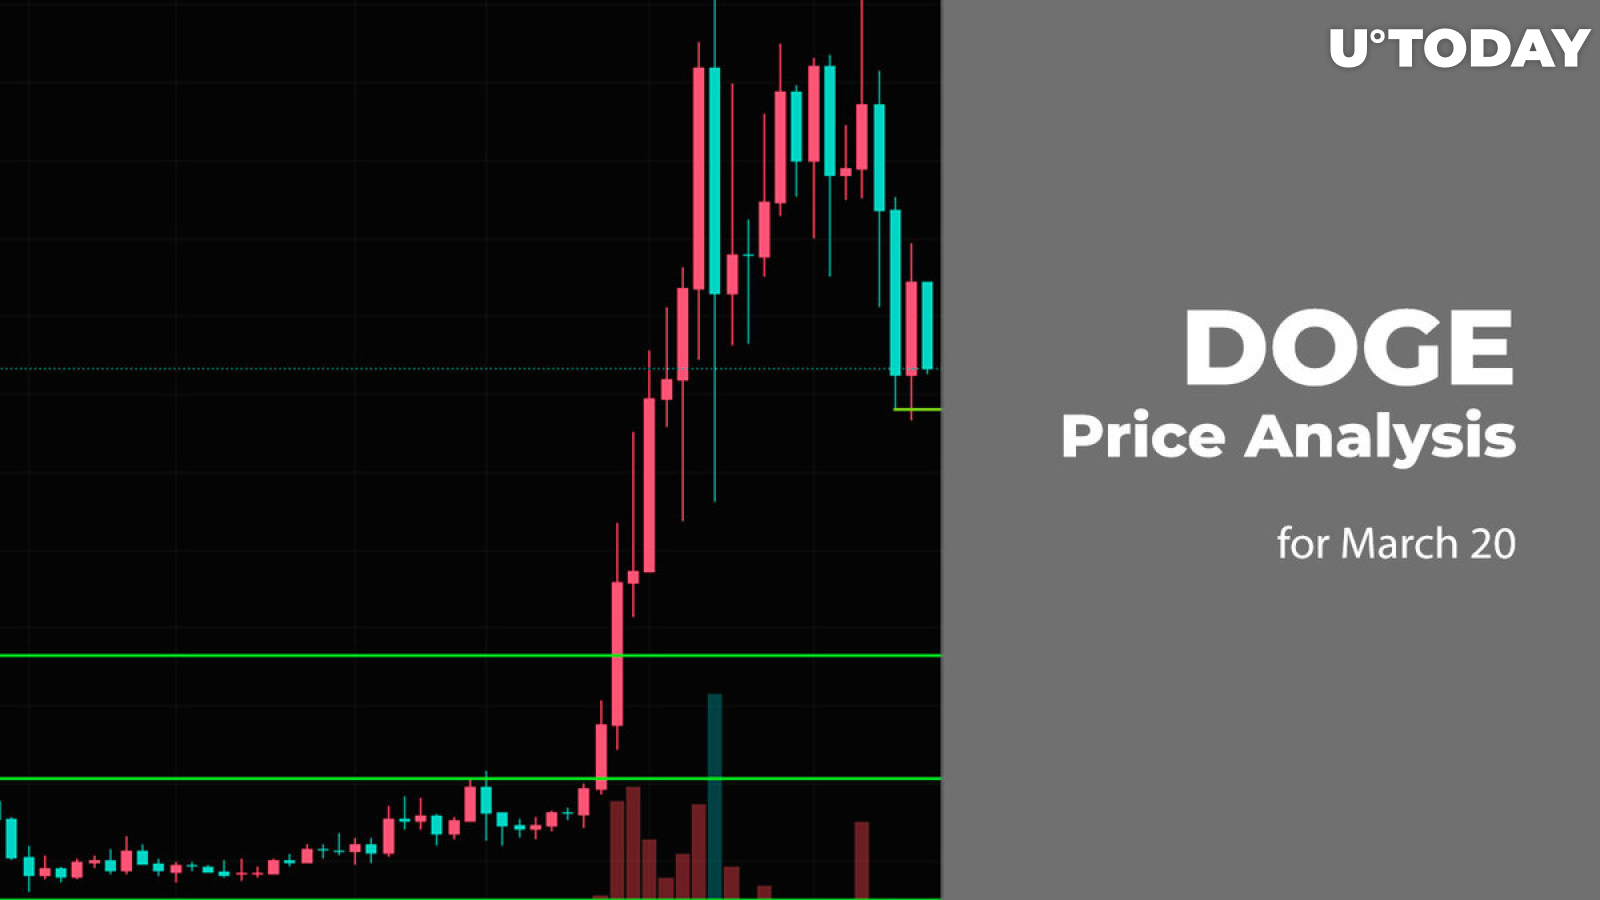 DOGE Price Prediction for March 20